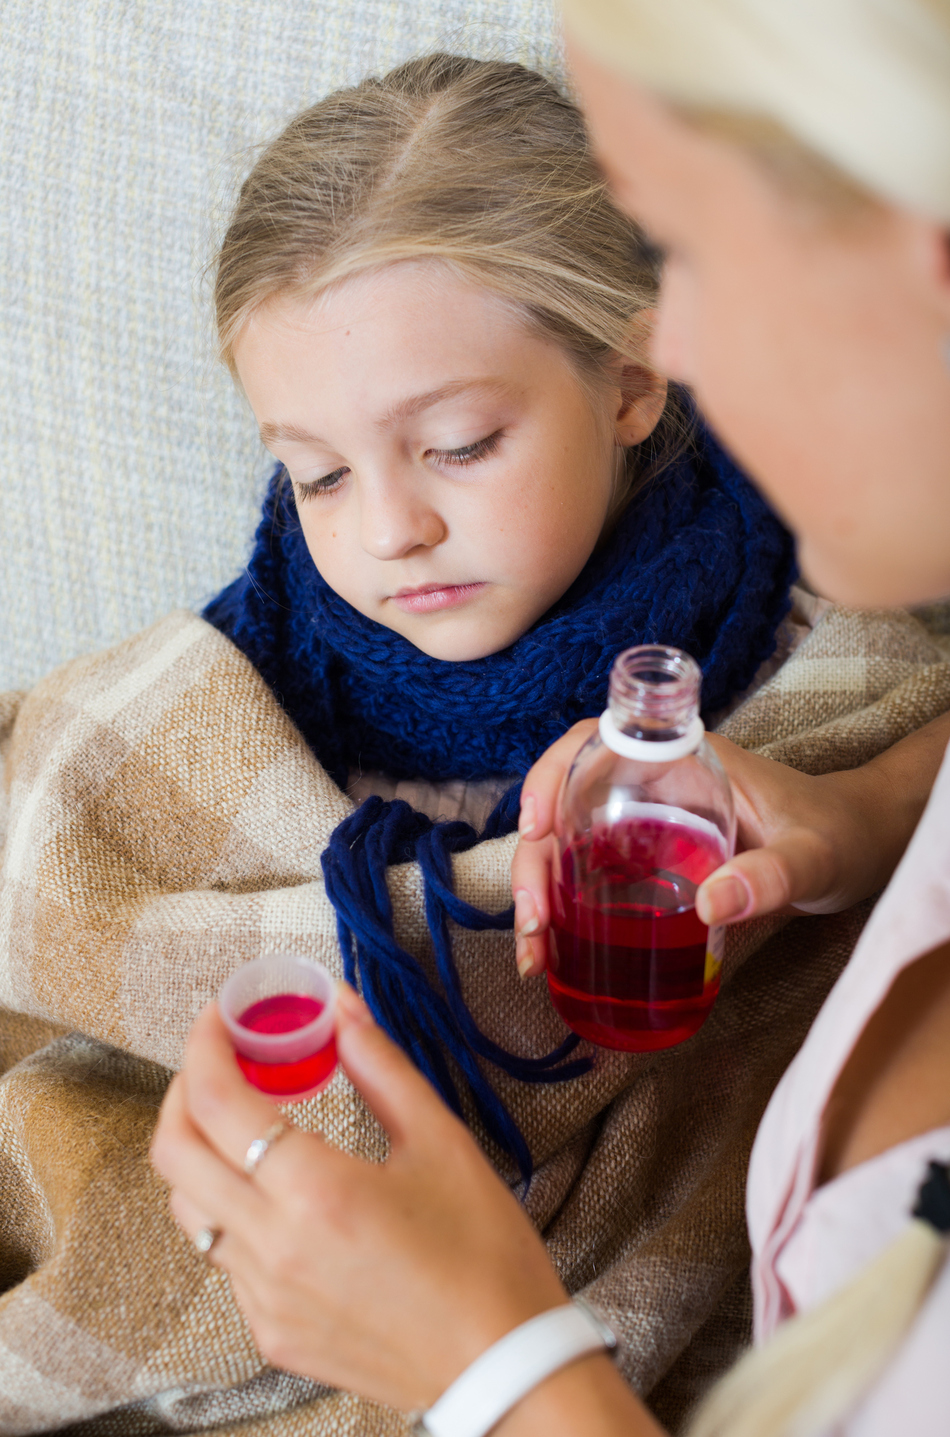 You Might Be Giving Your Child a Dangerous Dose of Liquid Medicine